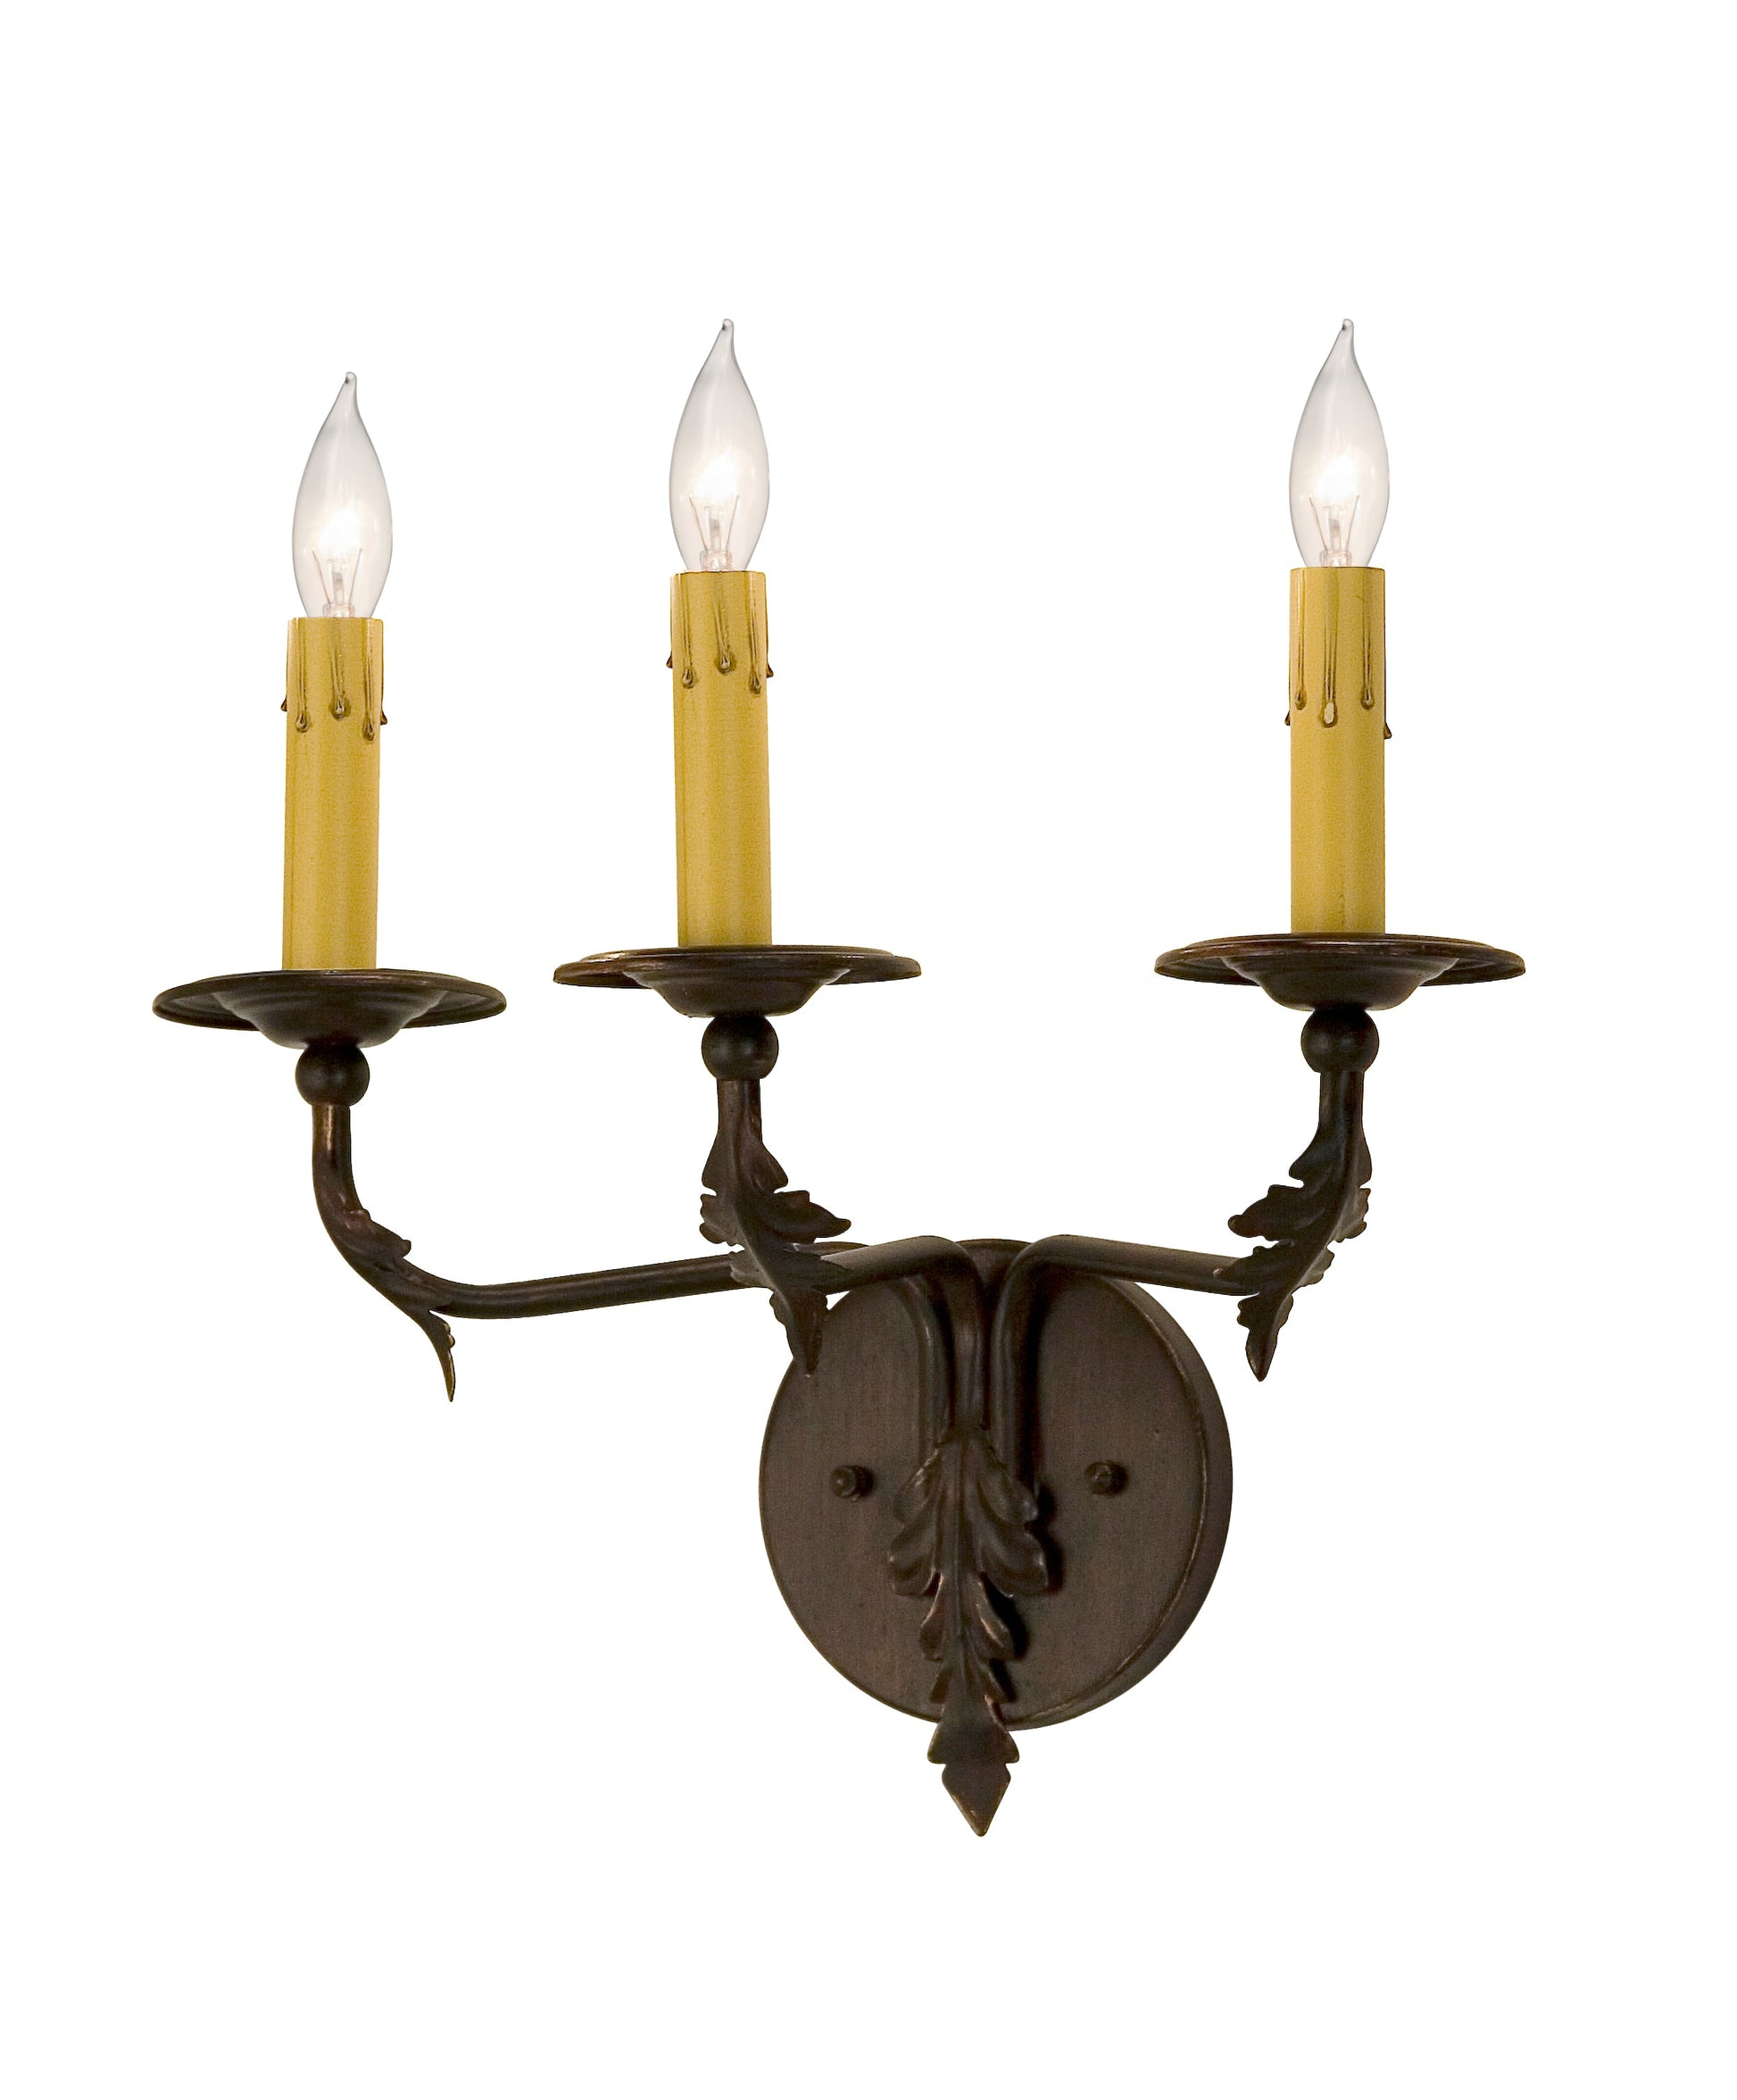 14" Sergius 3-Light Wall Sconce by 2nd Ave Lighting